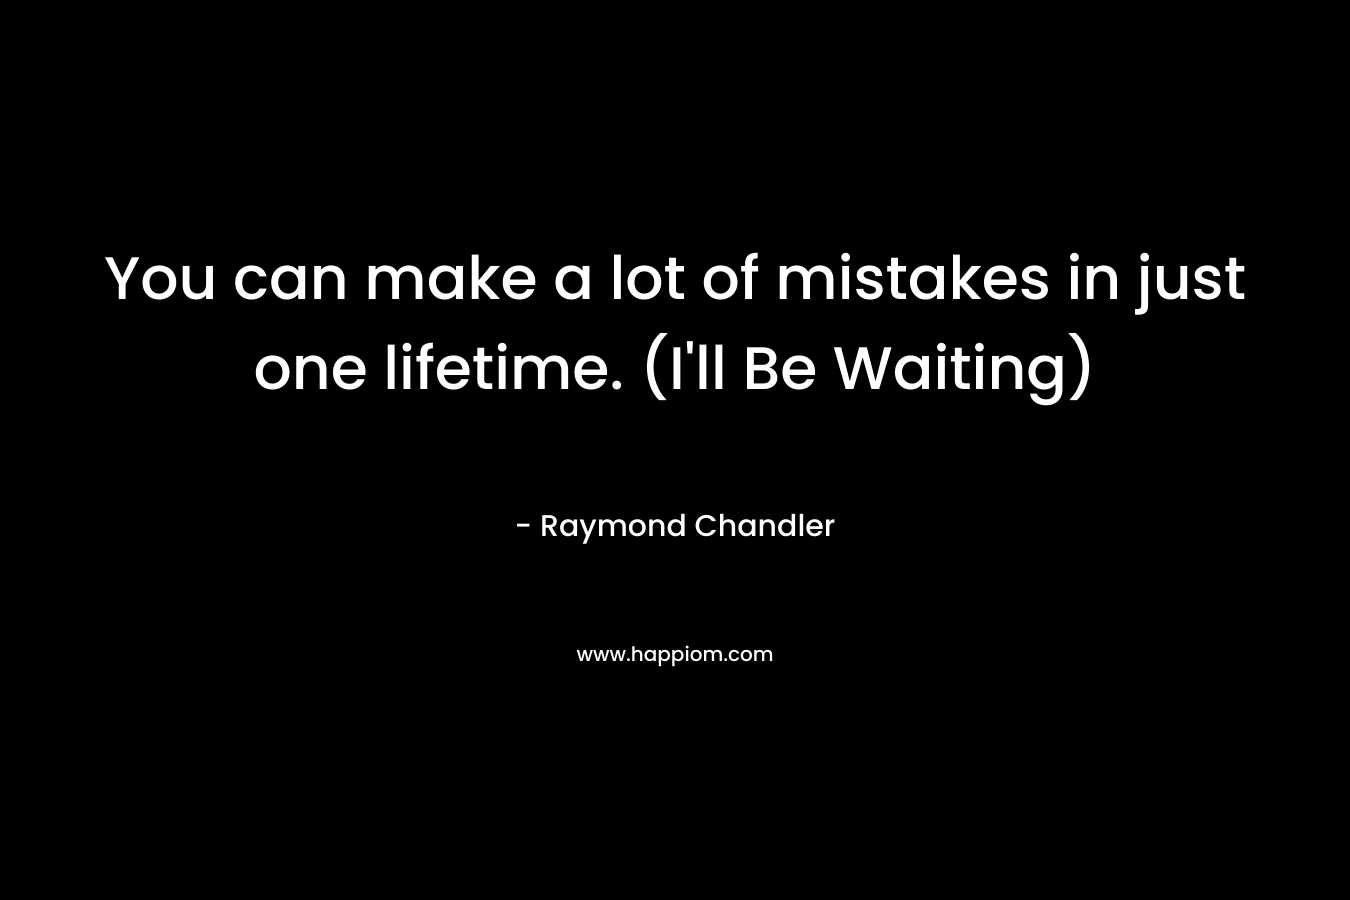 You can make a lot of mistakes in just one lifetime. (I’ll Be Waiting) – Raymond Chandler